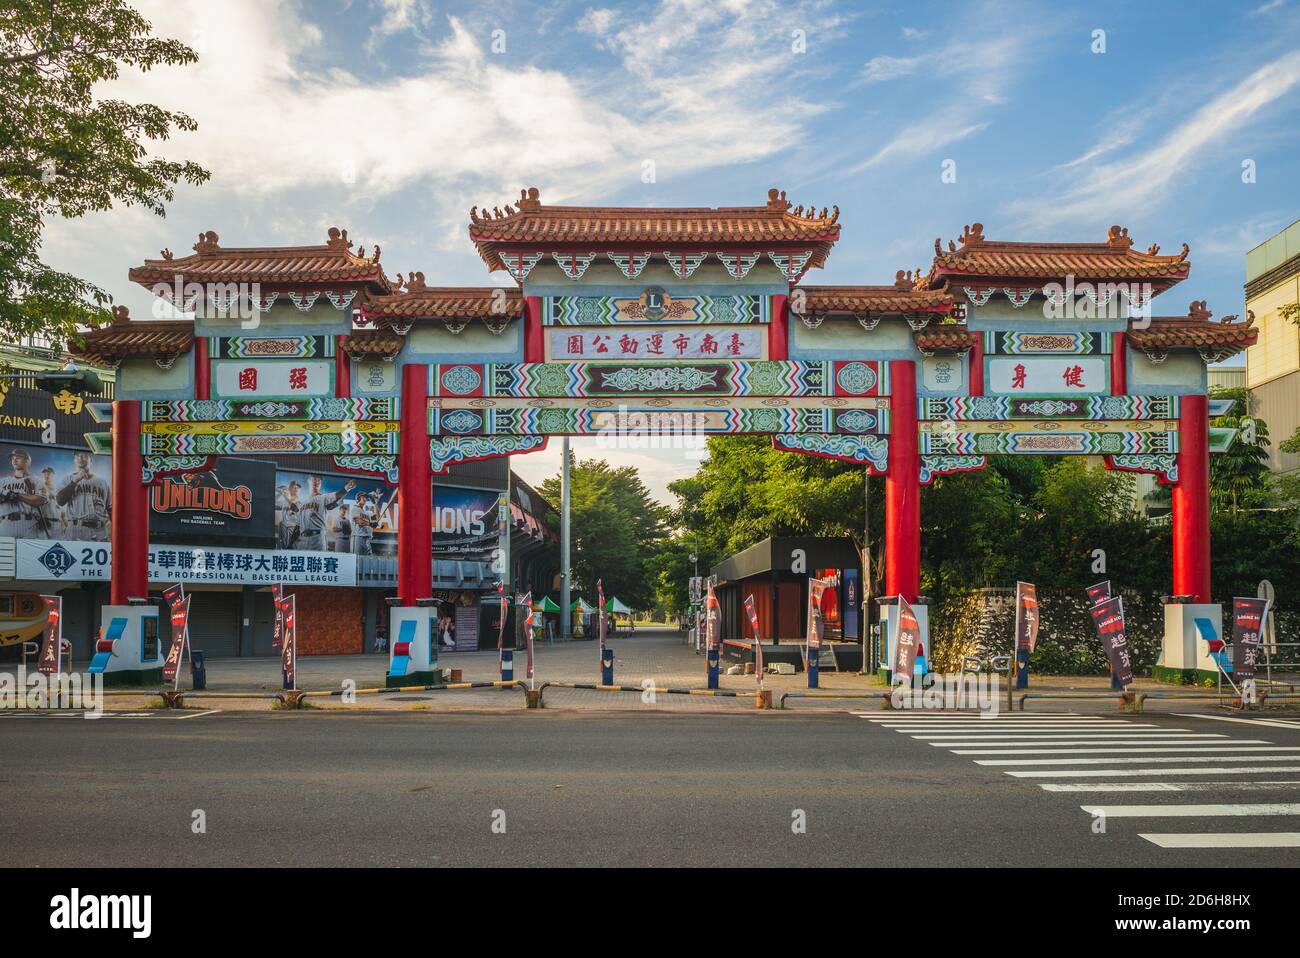 October 16, 2020: entrance gate of tainan sports park, aka Zhongzheng Memorial Sports Park, in tainan, taiwan. It is a complex with baseball stadium, Stock Photo